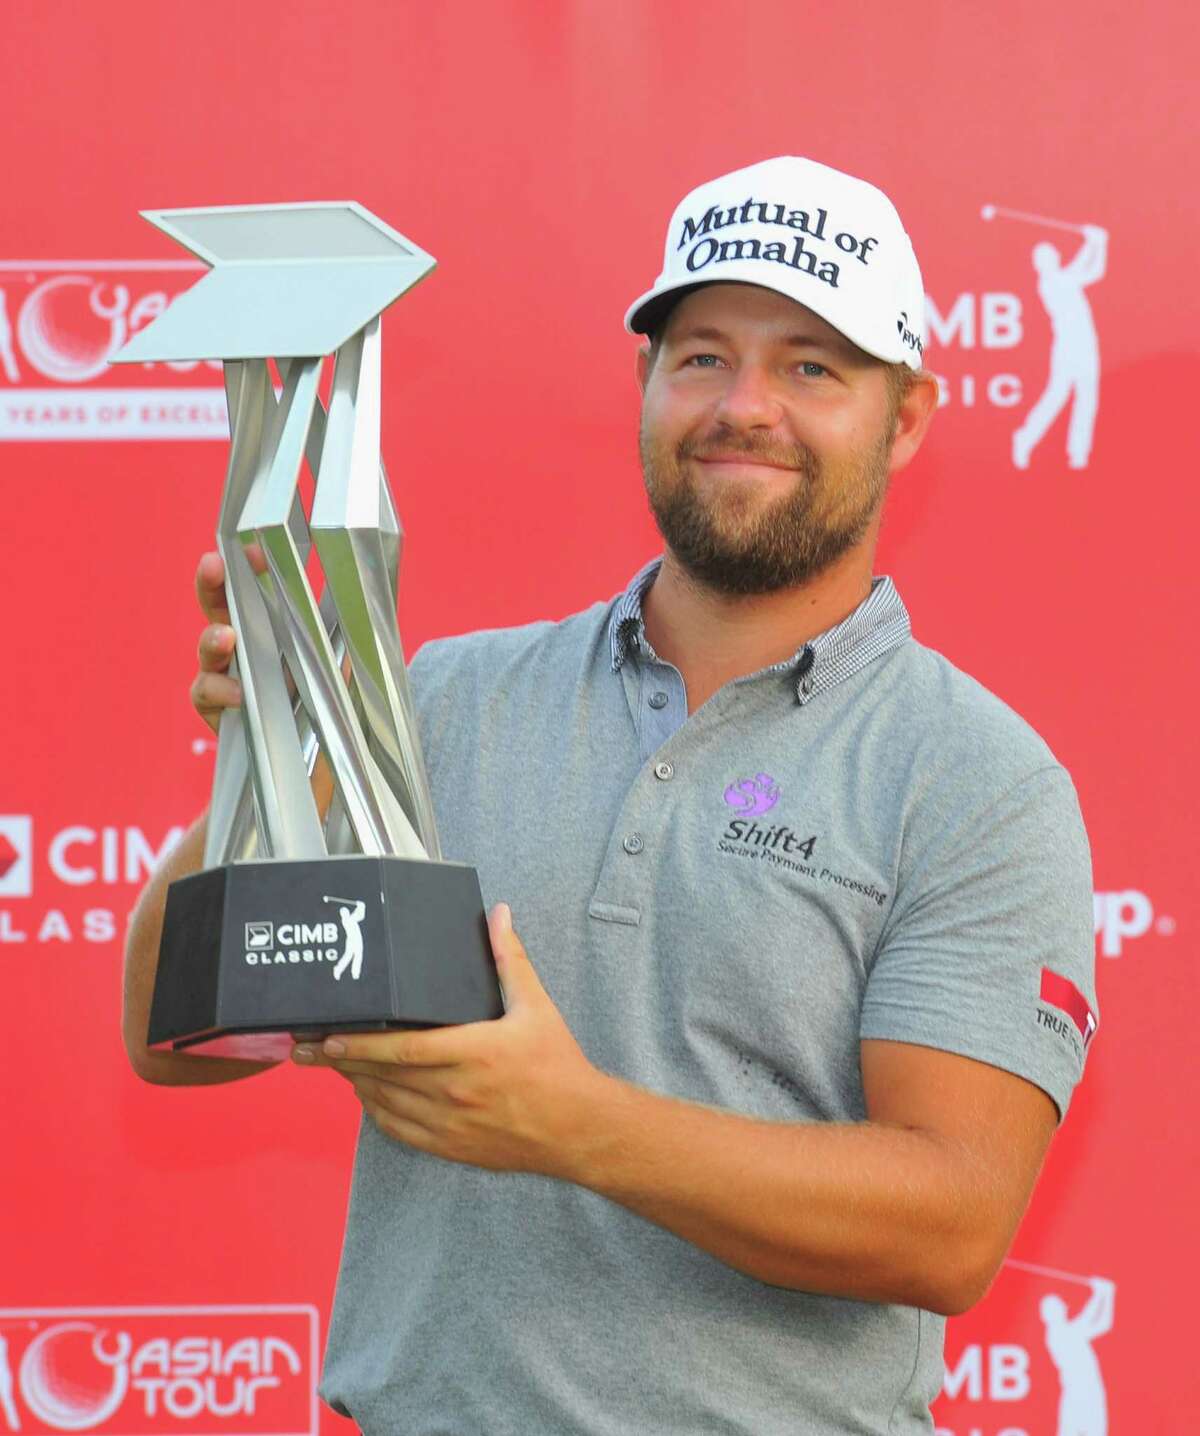 KUALA LUMPUR, MALAYSIA - OCTOBER 28: Ryan Moore of the United States poses with the CIMB Classic Trophy after he won it in a playoff with Gary Woodland of the United States during the playoff during the CIMB Classic at Kuala Lumpur Golf & Country Club on October 28, 2013 in Kuala Lumpur, Malaysia. (Photo by Stanley Chou/Getty Images)